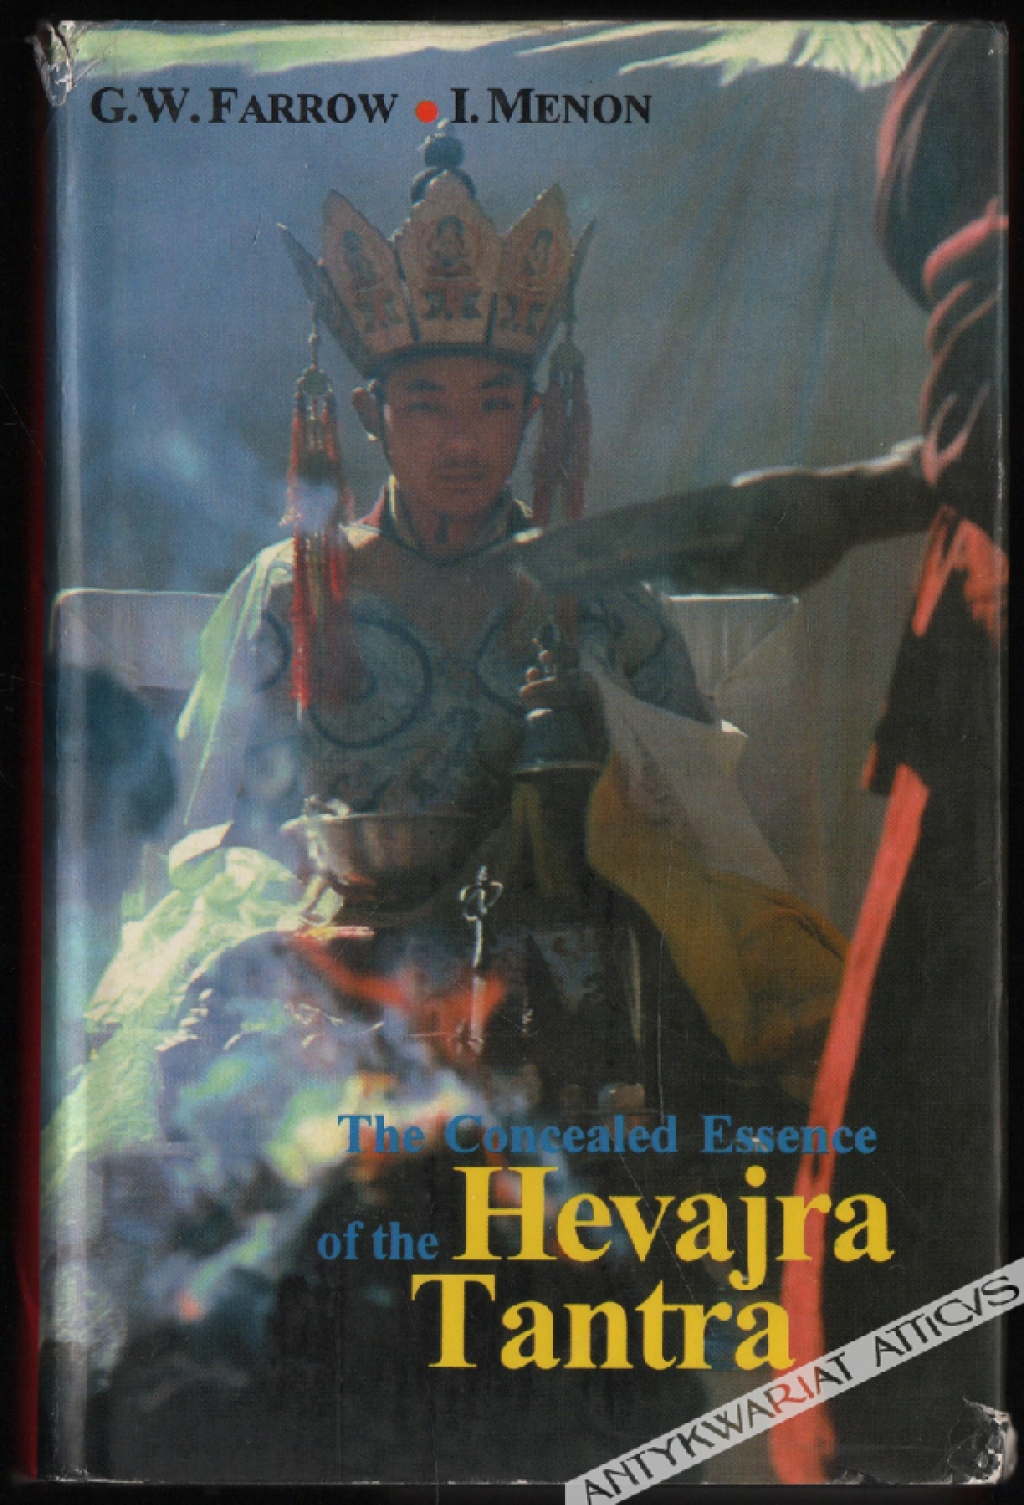 The Conceled Essence of the Hevajra Tantra